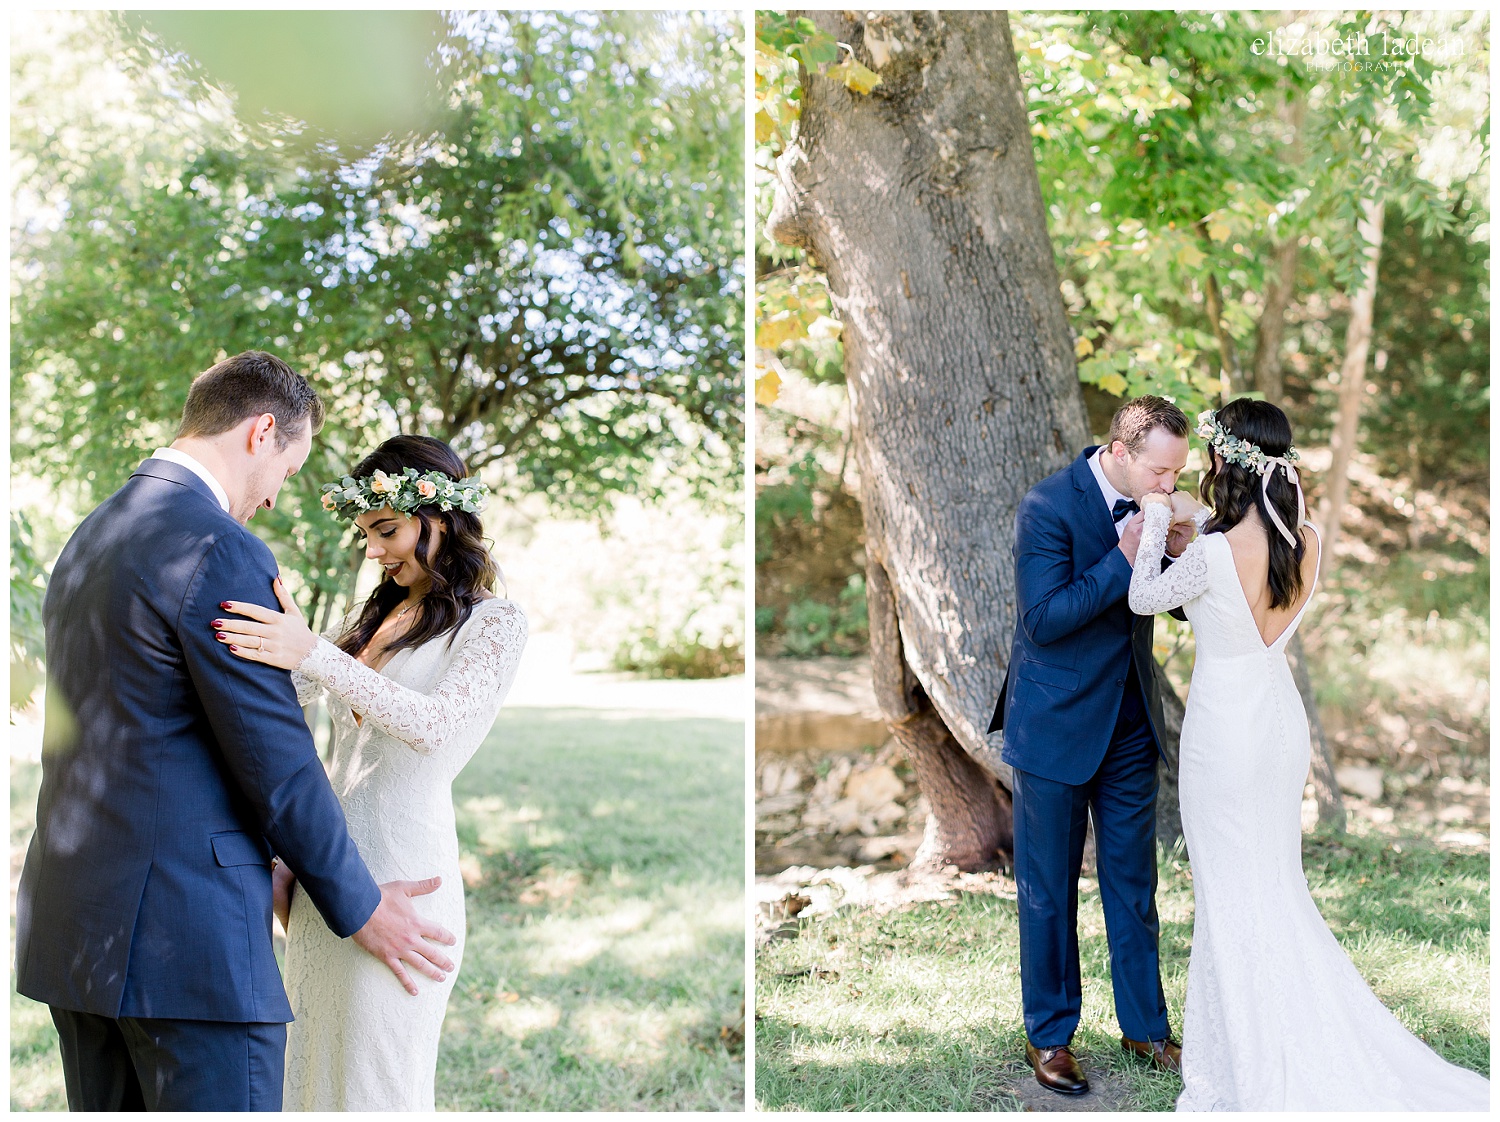 Willow-Creek-Blush-and-Blues-Outdoor-Wedding-Photography-S+Z2018-elizabeth-ladean-photography-photo_0528.jpg